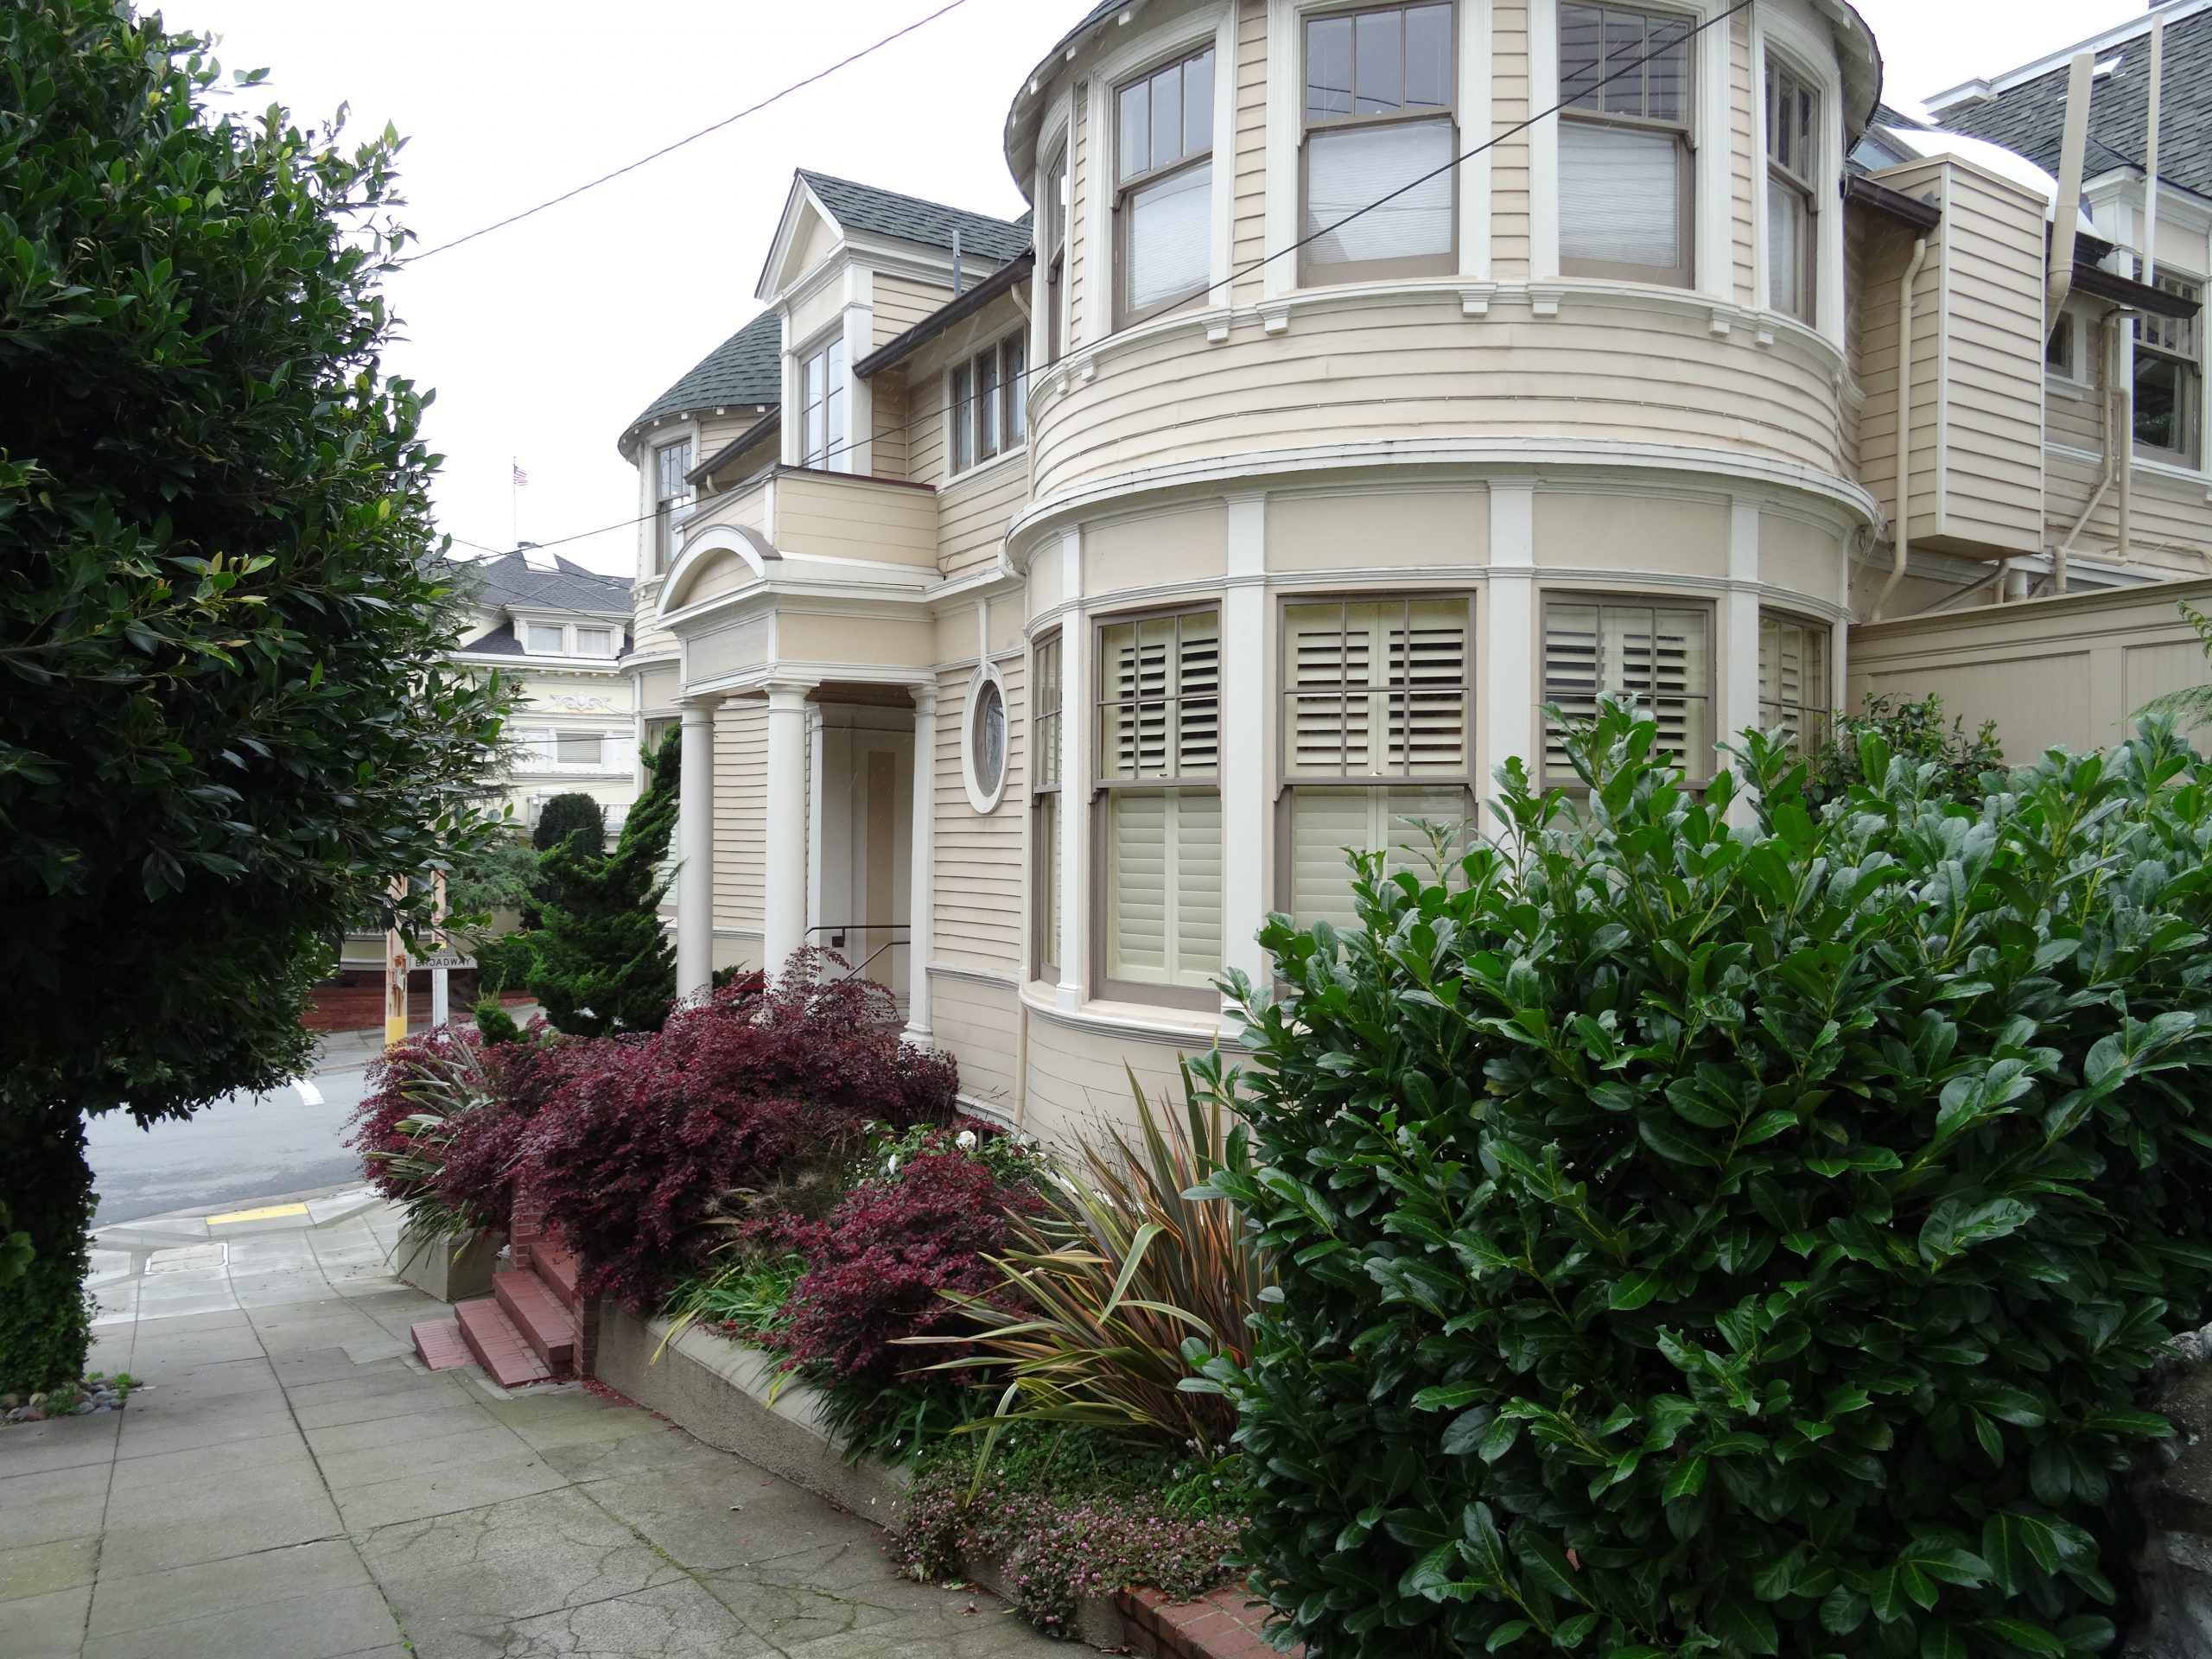 How to find Mrs Doubtfire's House in San Francisco